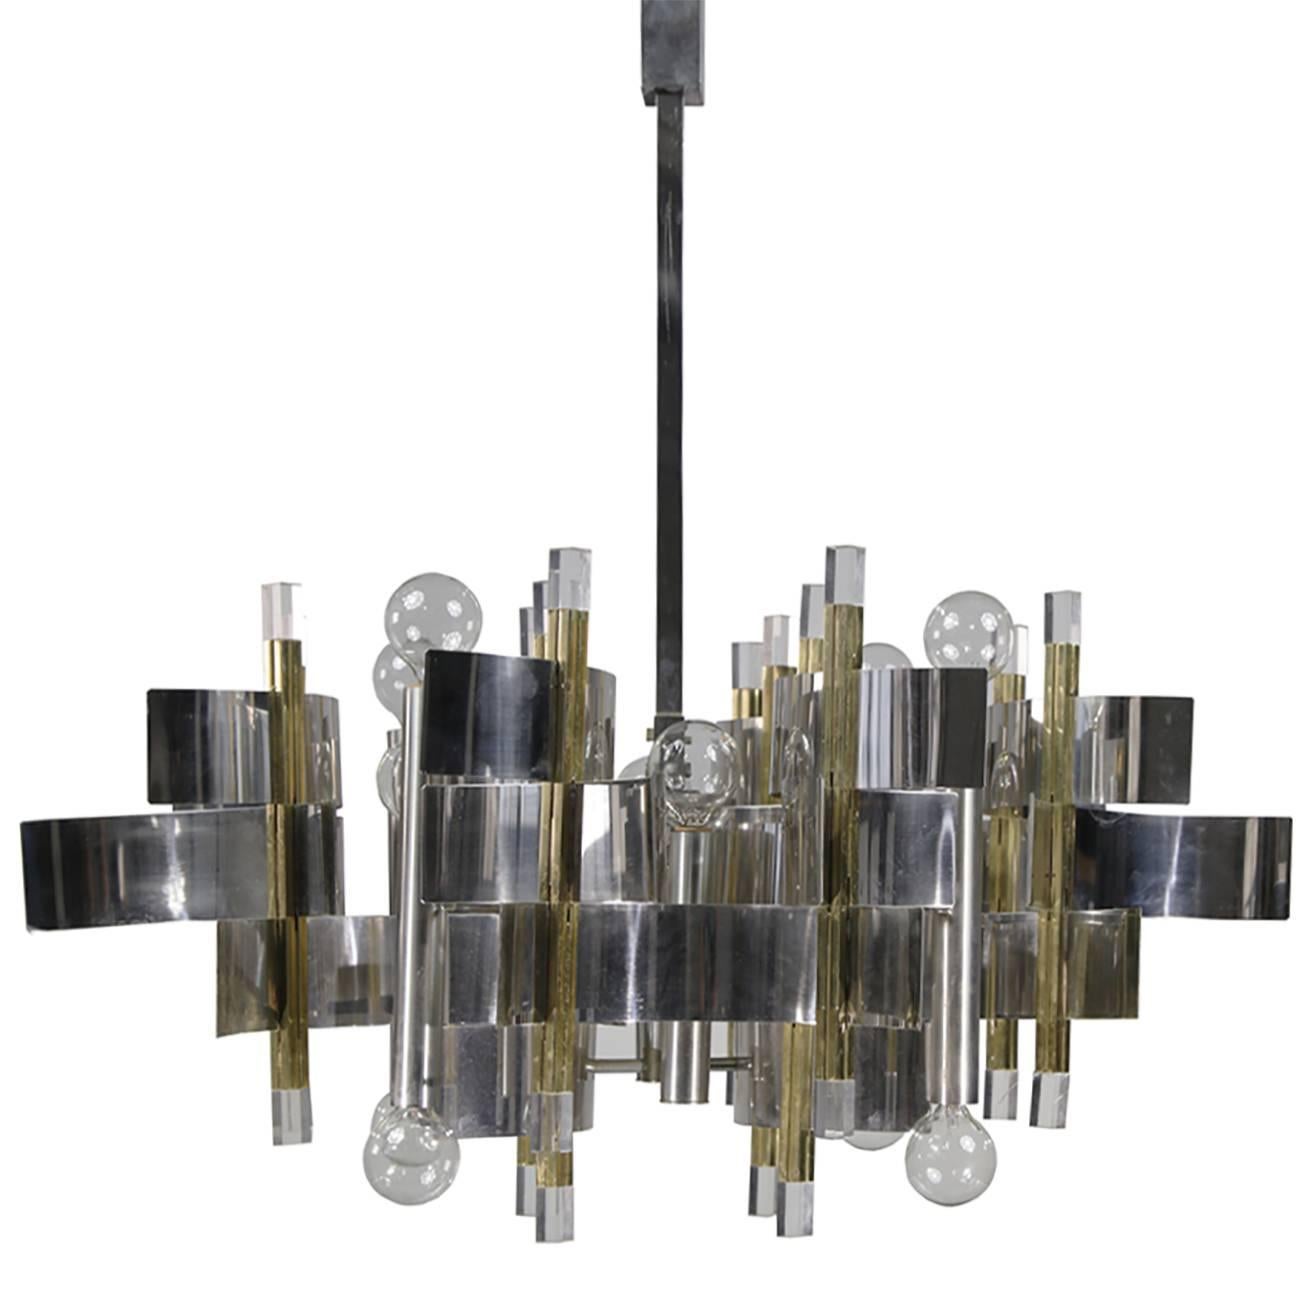 Twelve-light two-tone expressionist chandelier by Gaetano Sciolari.
Chrome finished bent metal arcs in polished and satin finish, combine and tier between brass poles accented by acrylic tips in a structured and highly stylized cubic integration.